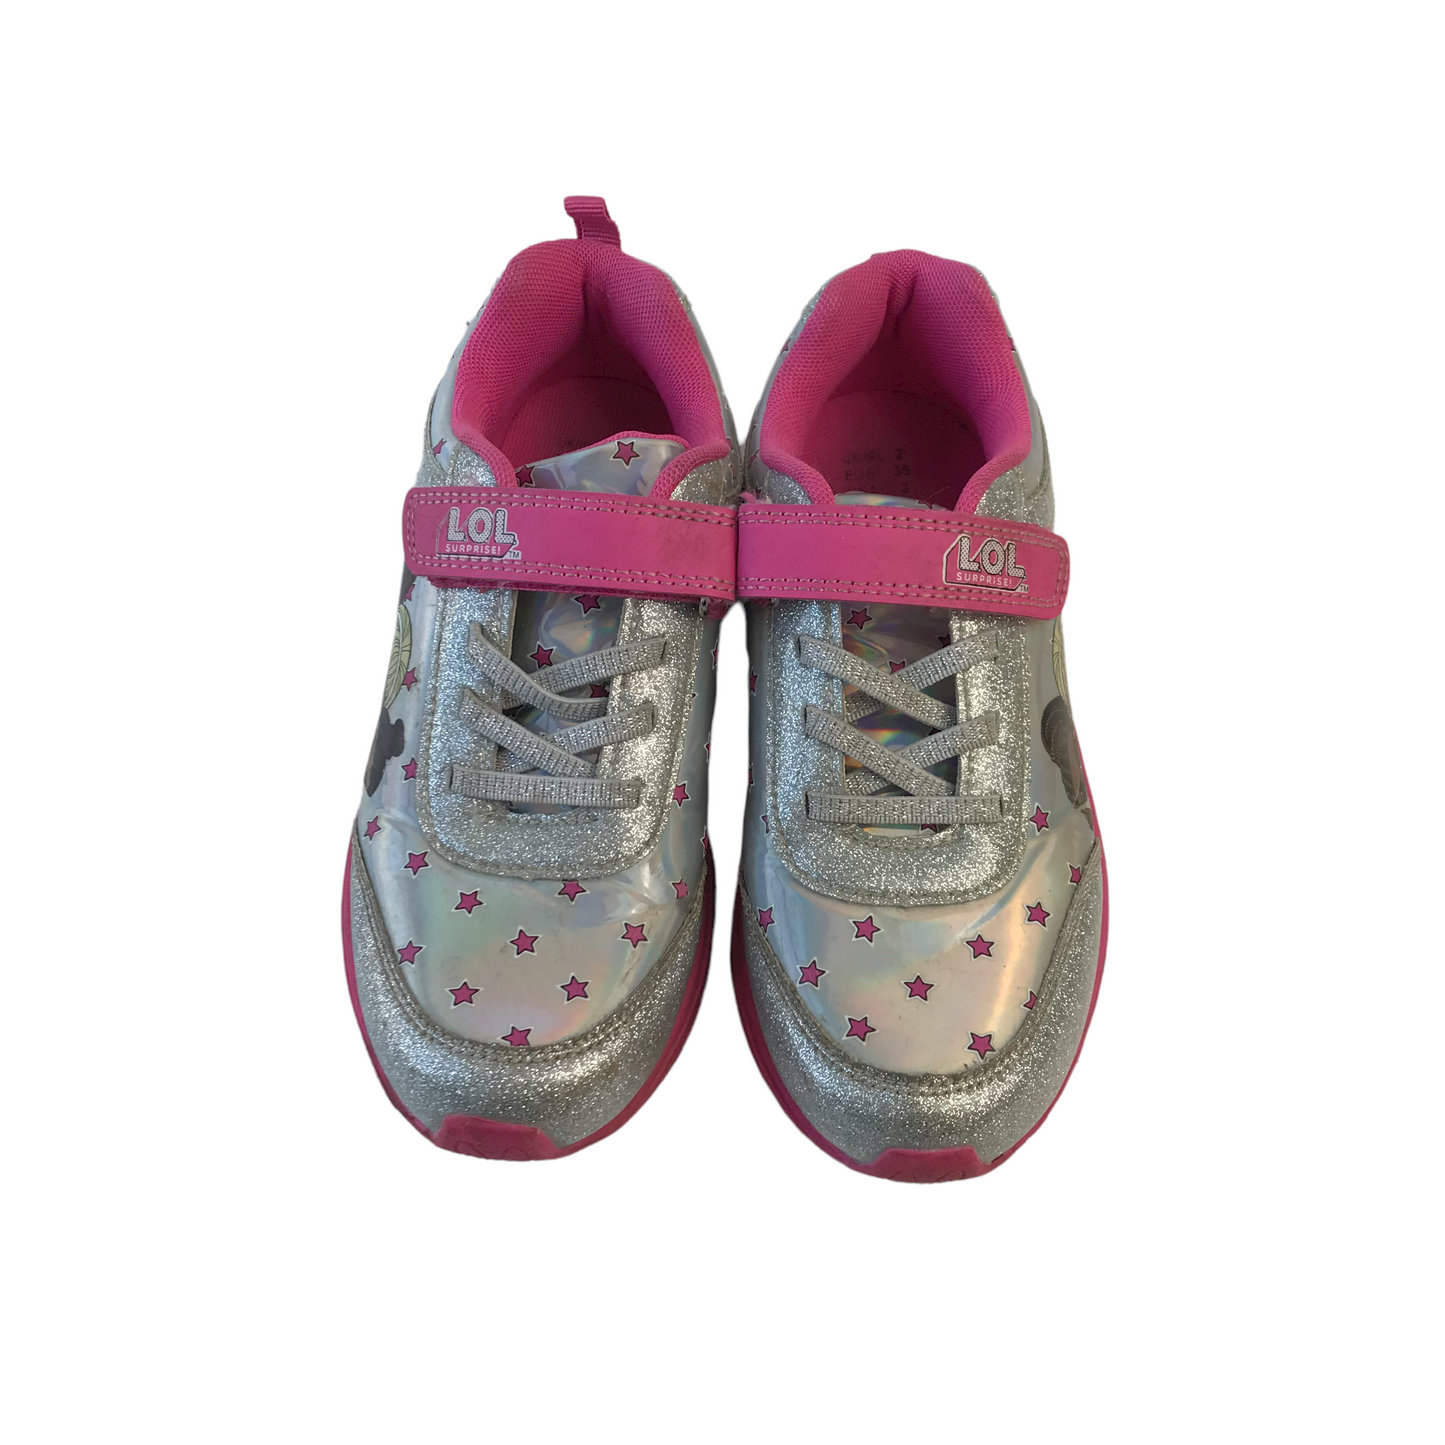 LOL Silver and Pink Trainers Shoe Size 2